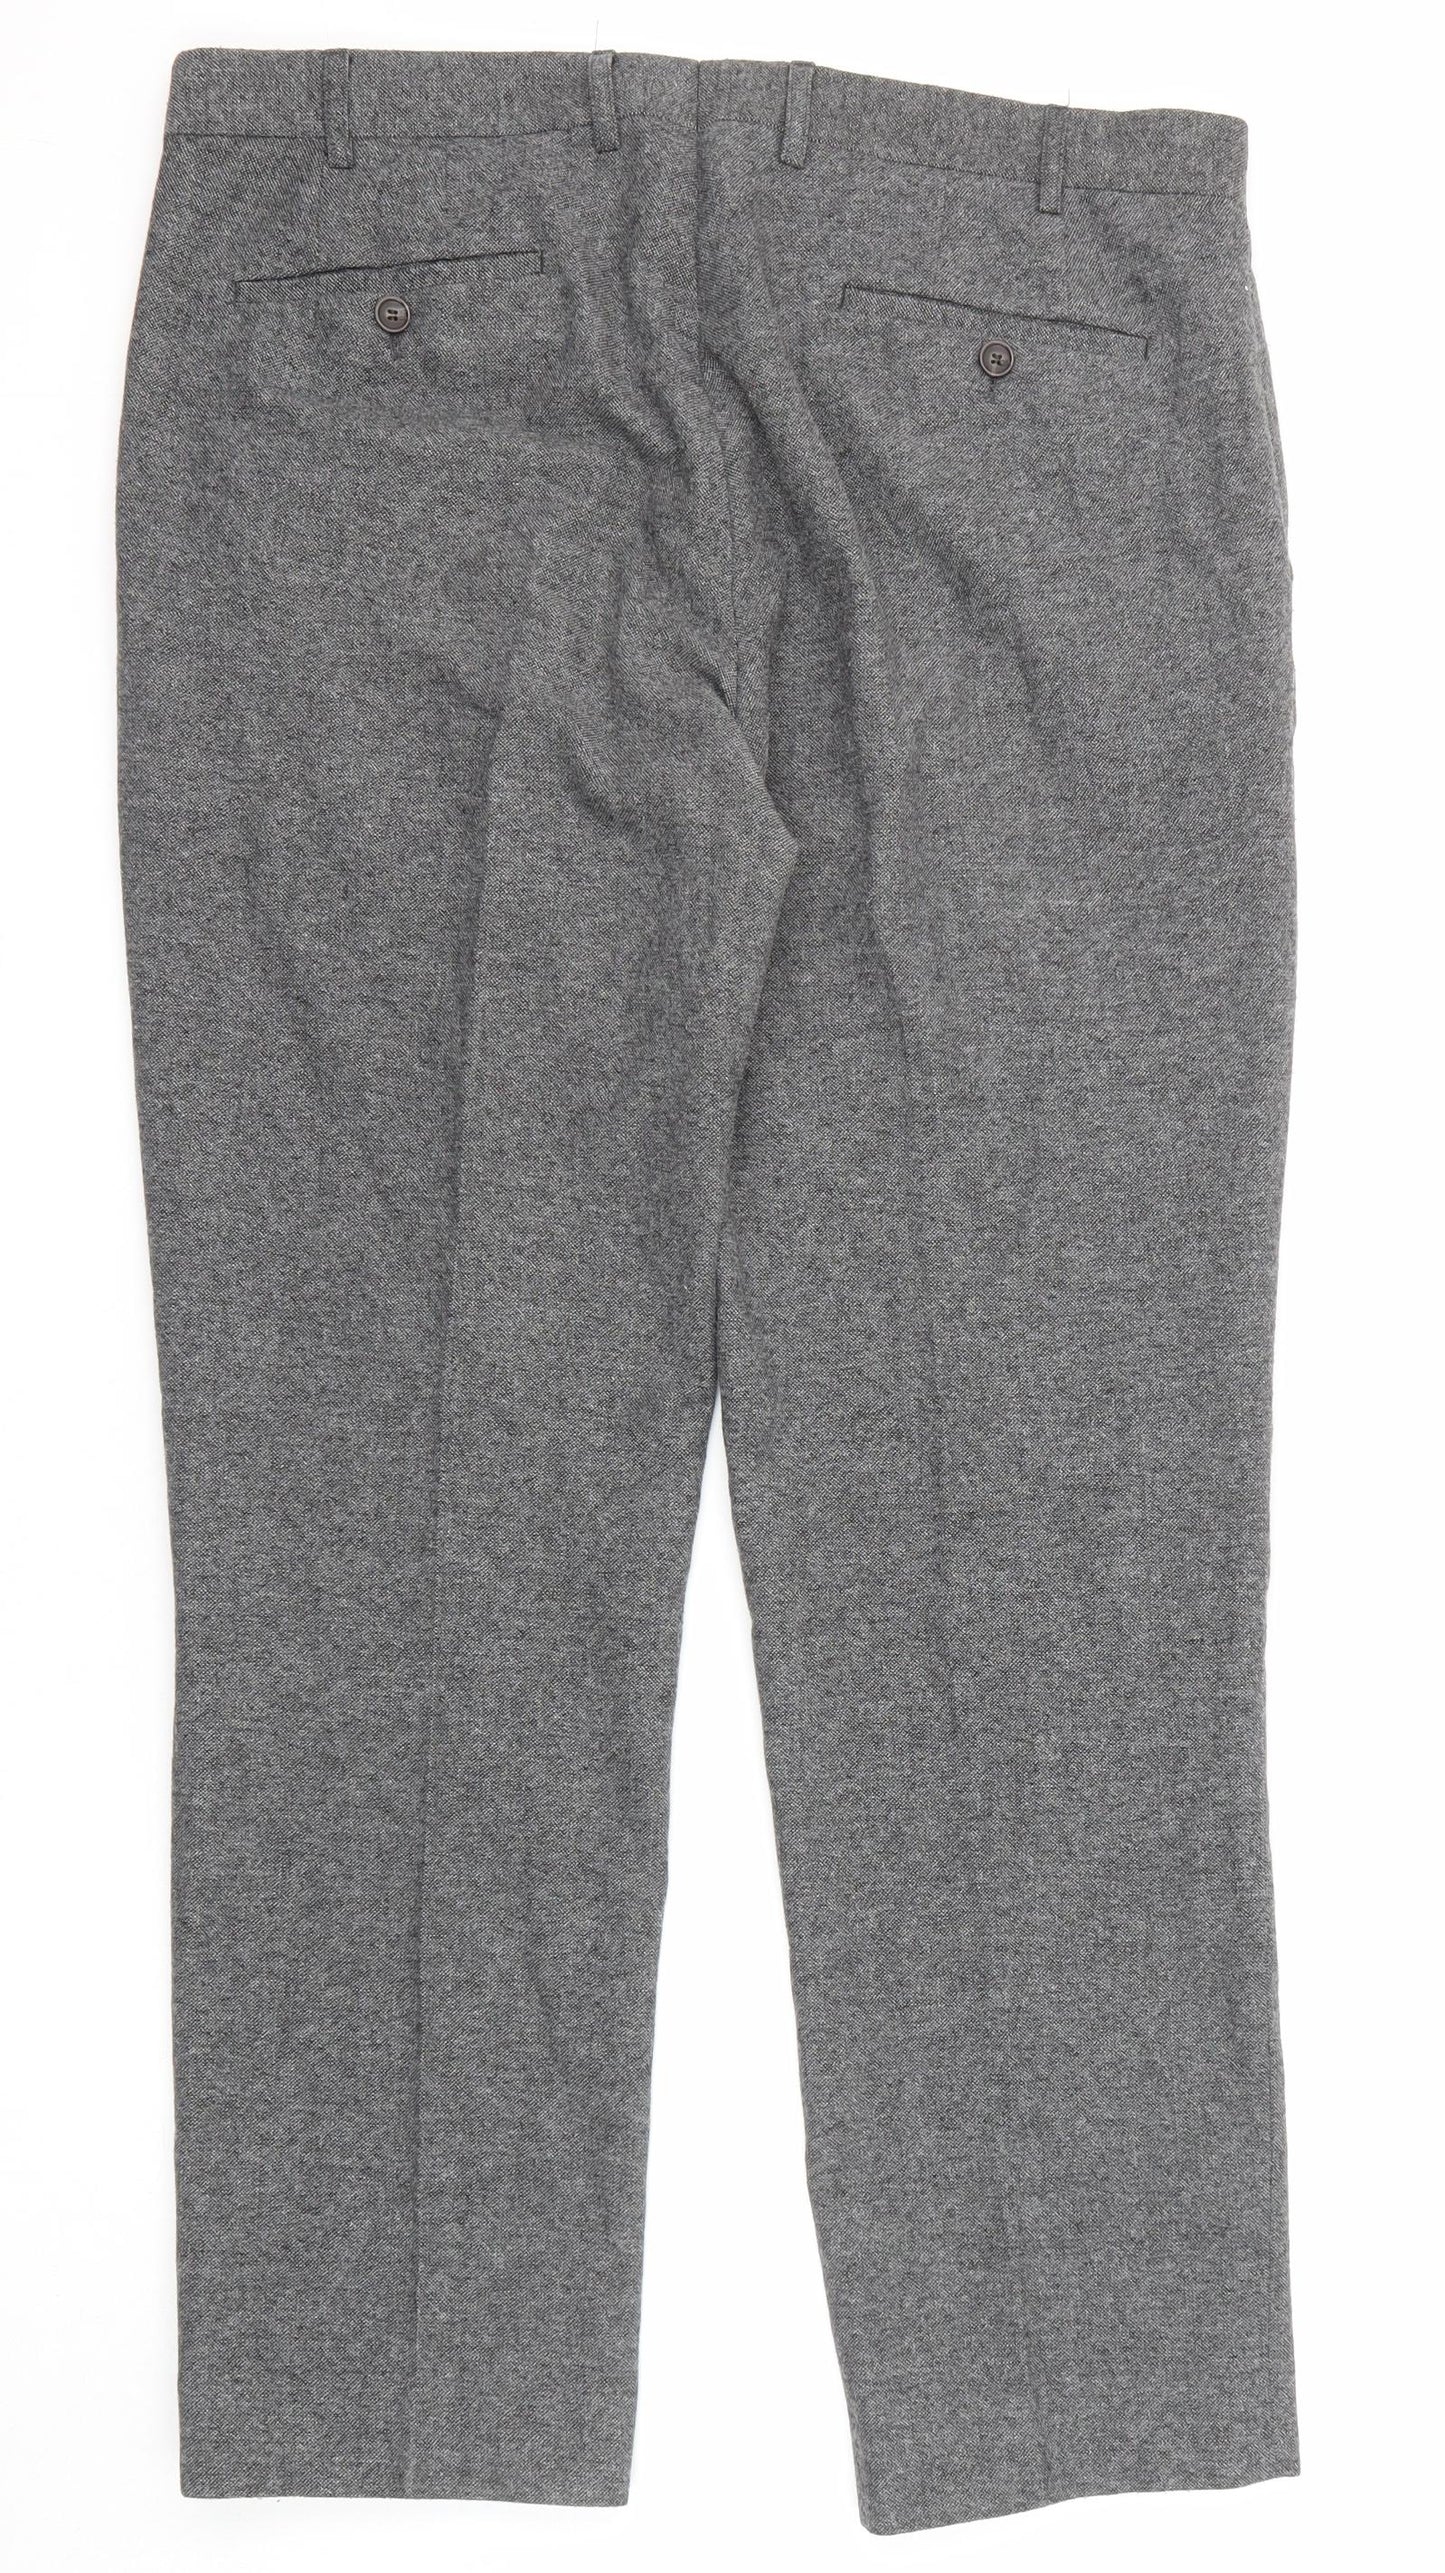 Skopes Mens Grey Polyester Dress Pants Trousers Size 36 in L30 in Regular Zip